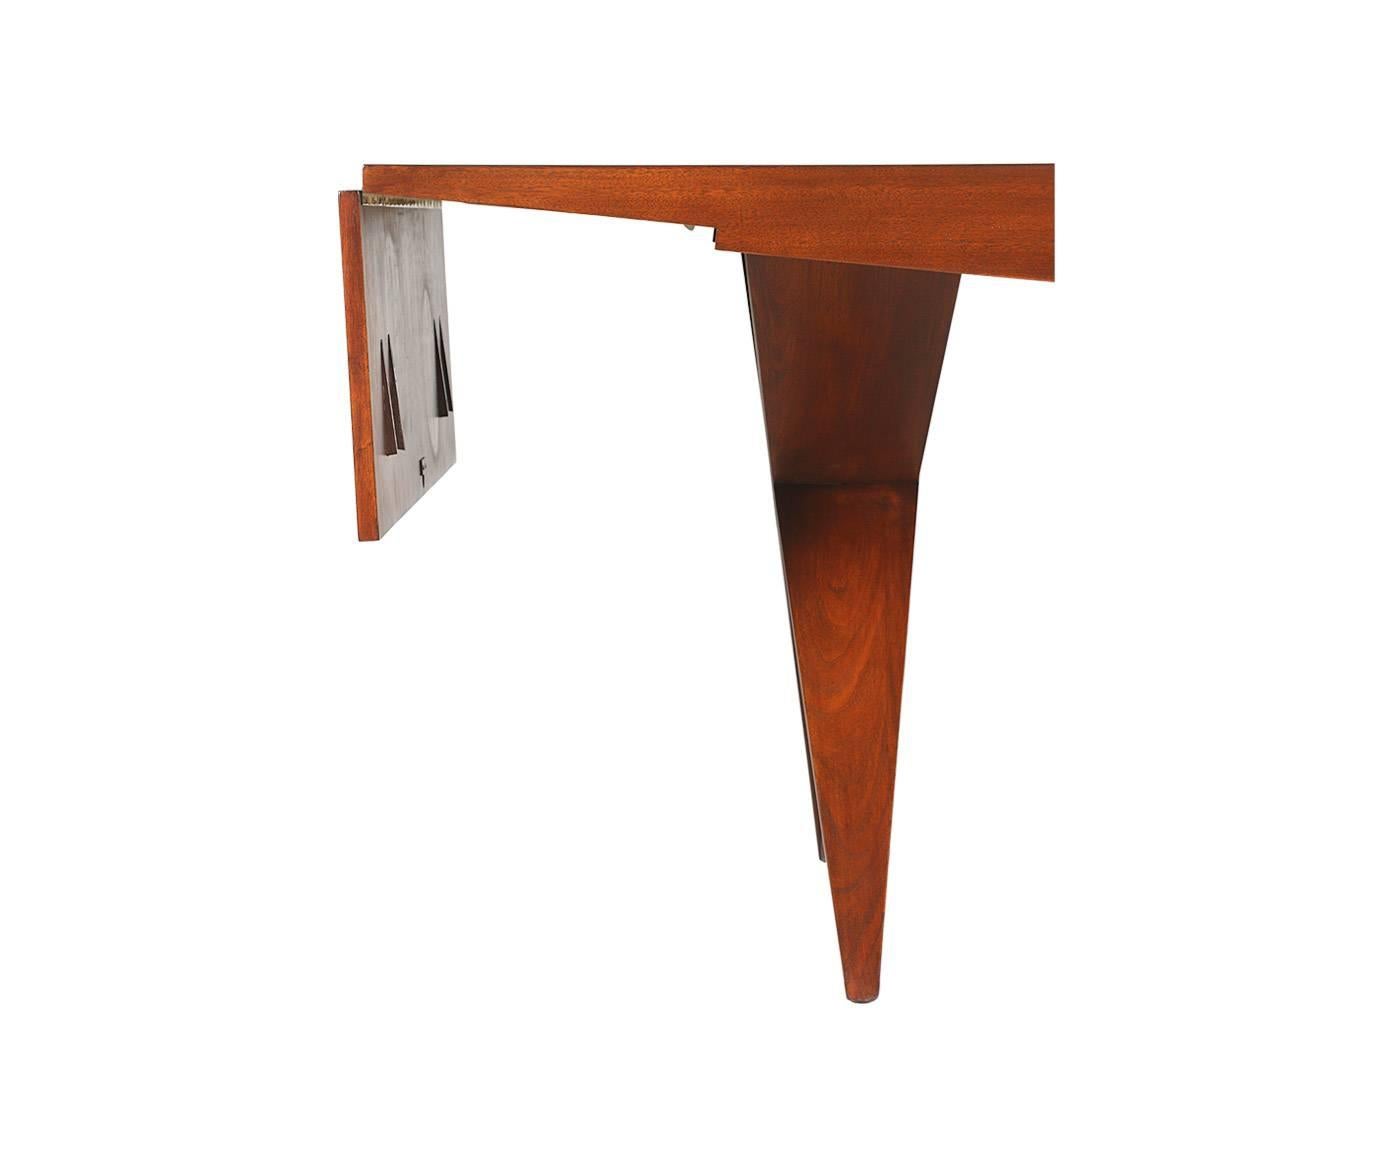 American Rare Architectural Dining Table by Dan Johnson for Hayden Hall Furniture